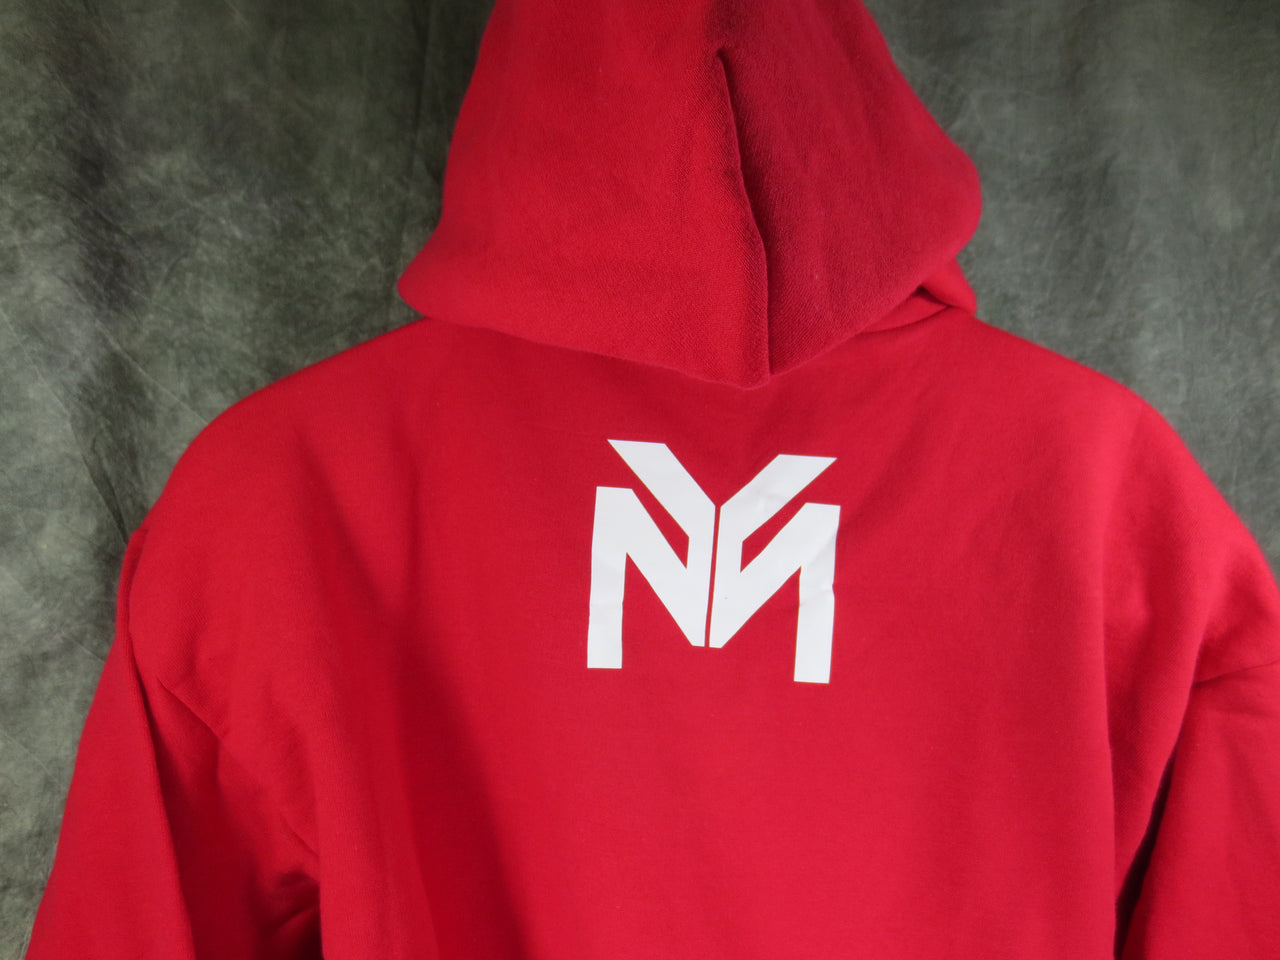 Red YMCMB Hoodie With White Print - TshirtNow.net - 4